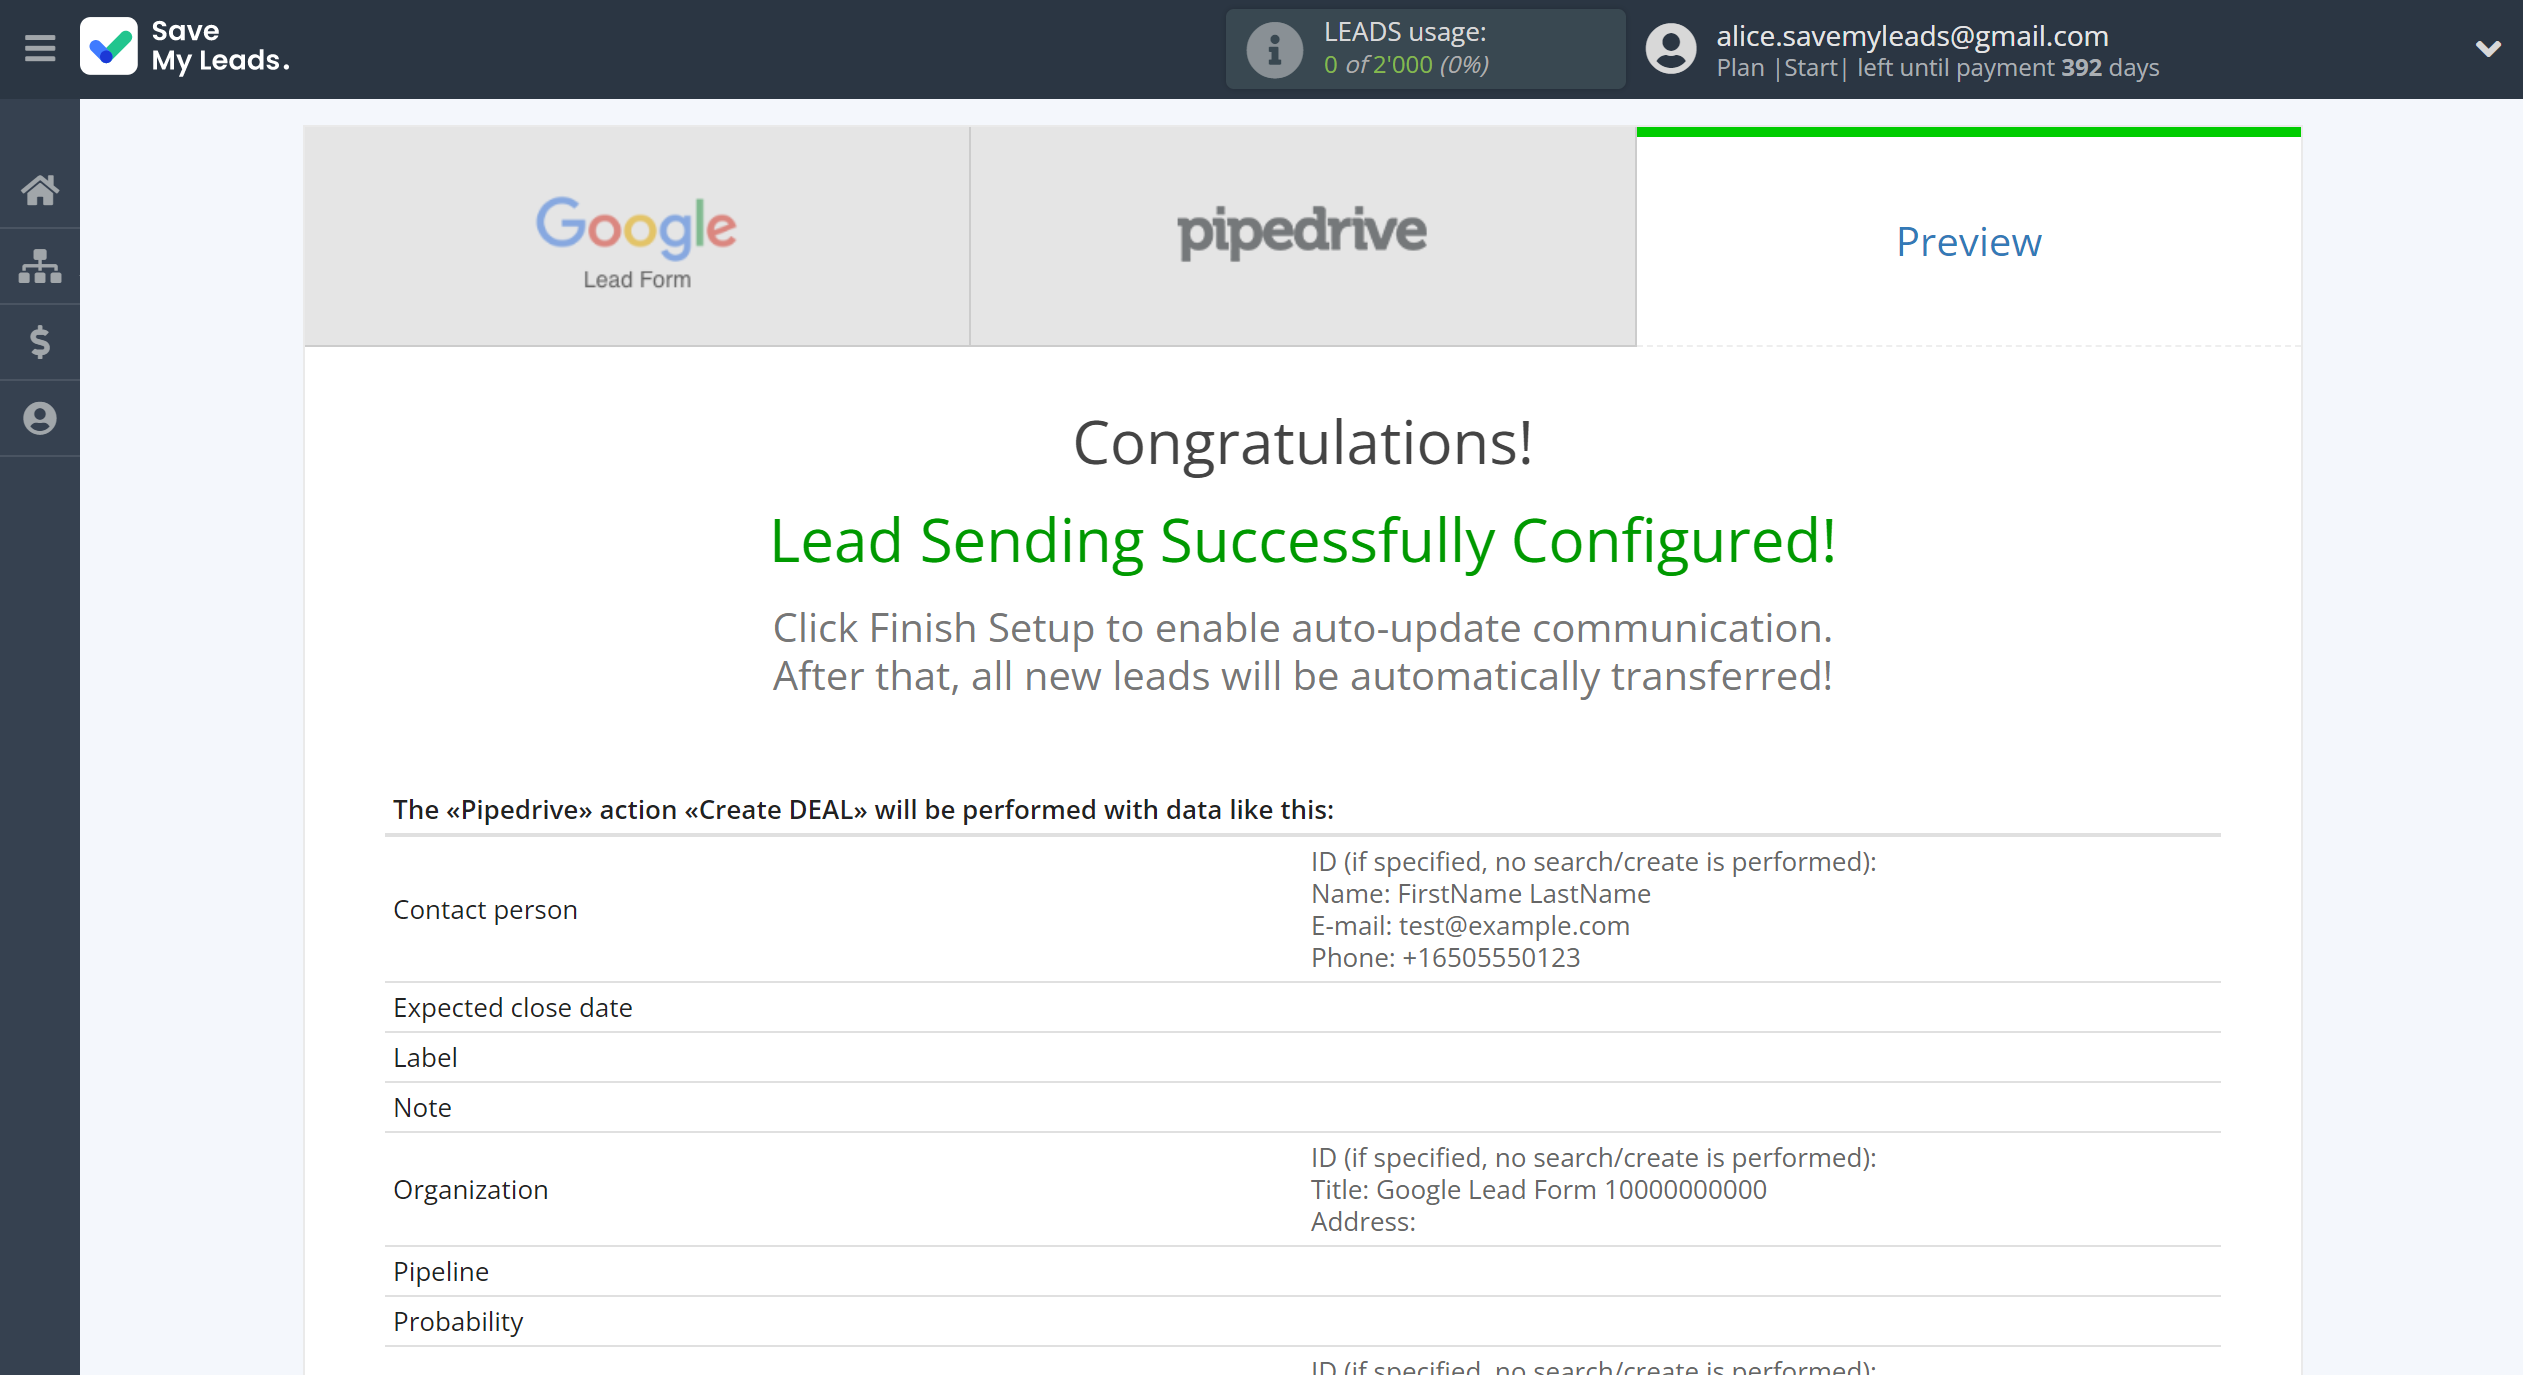 How to Connect Google Lead Form with Pipedrive Create Deal | Test data